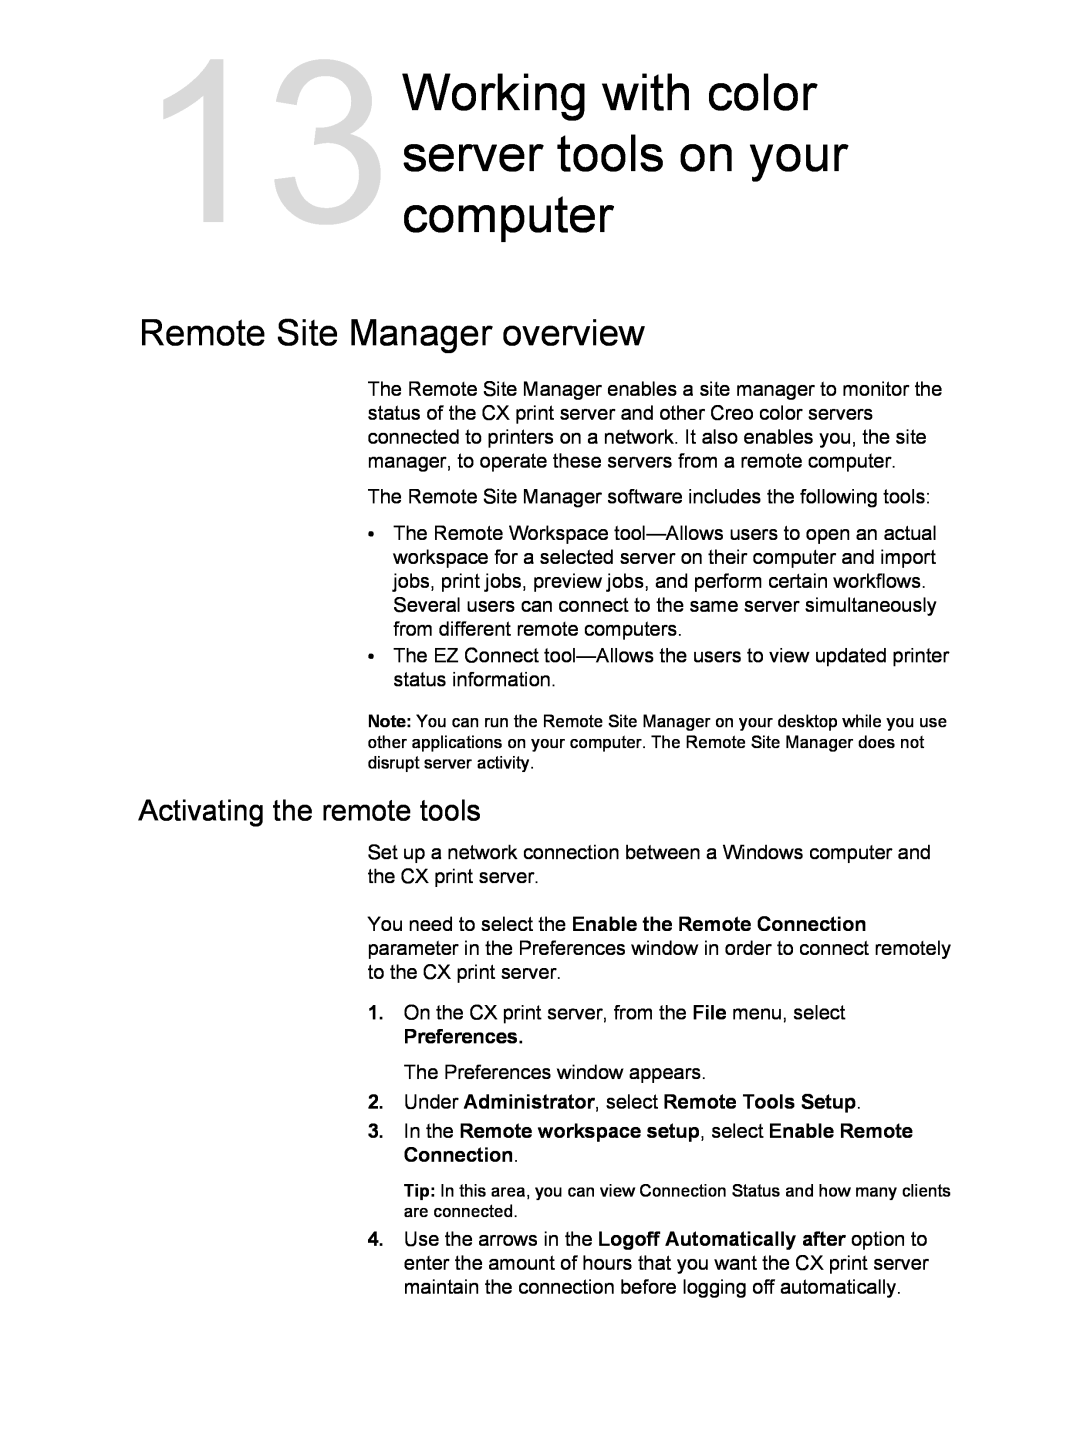 Xerox 550, 560 manual Remote Site Manager overview, Activating the remote tools, Preferences 